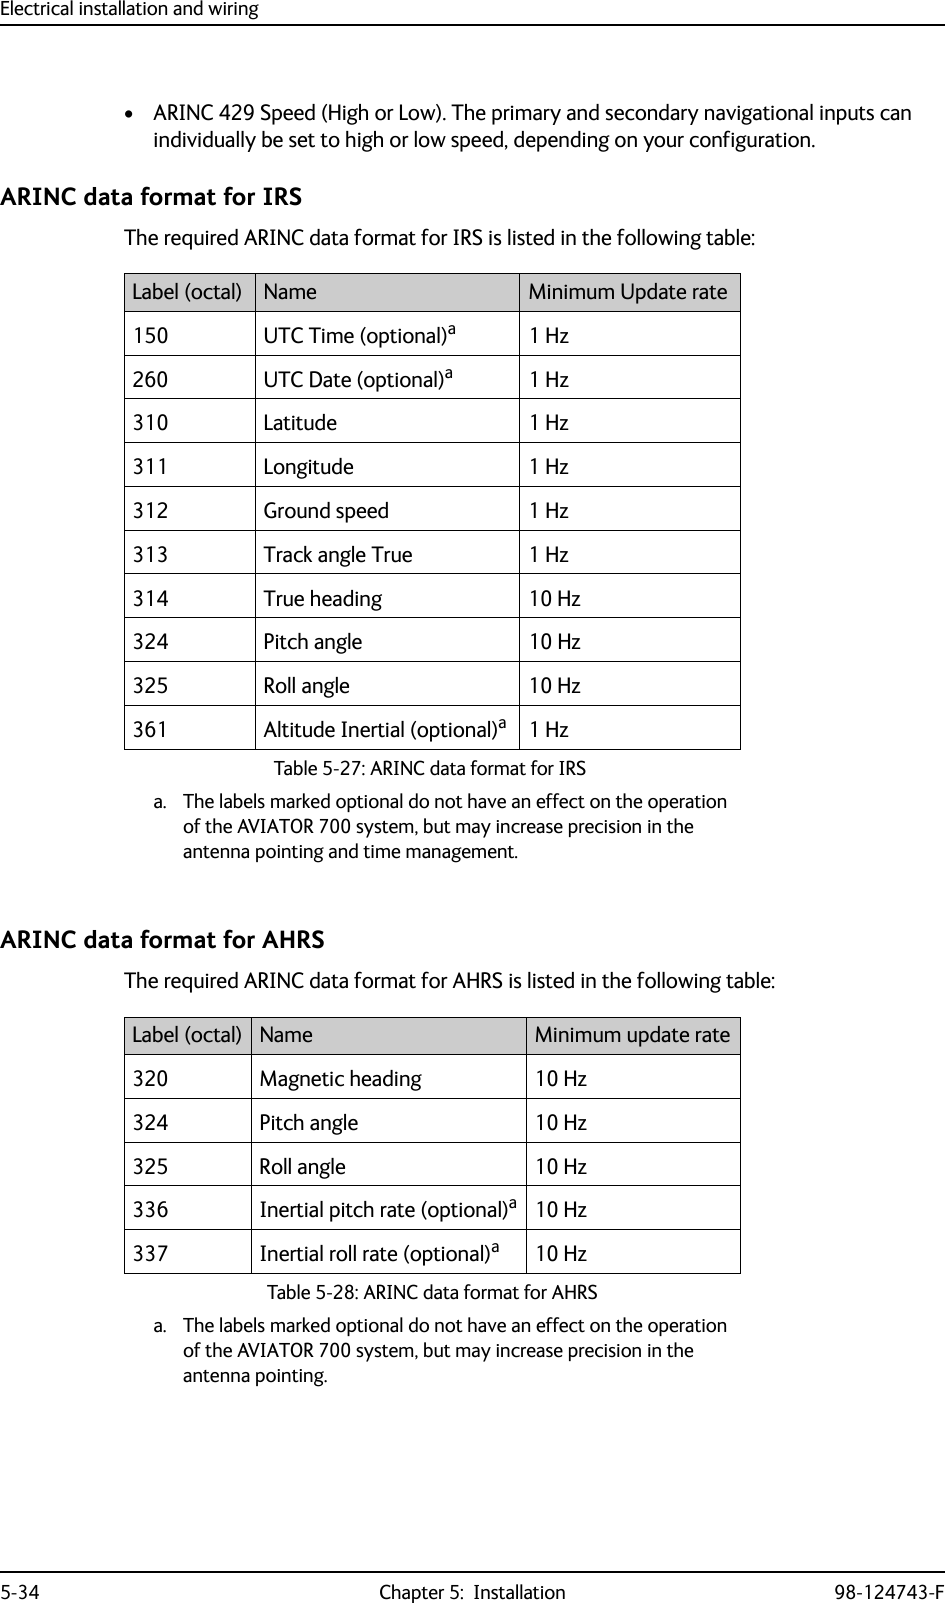 Electrical installation and wiring5-34 Chapter 5:  Installation 98-124743-F•ARINC 429 Speed (High or Low). The primary and secondary navigational inputs can individually be set to high or low speed, depending on your configuration.ARINC data format for IRSThe required ARINC data format for IRS is listed in the following table:ARINC data format for AHRSThe required ARINC data format for AHRS is listed in the following table:Label (octal) Name Minimum Update rate150 UTC Time (optional)a1 Hz260 UTC Date (optional)a1 Hz310 Latitude 1 Hz311 Longitude 1 Hz312 Ground speed 1 Hz313 Track angle True 1 Hz314 True heading 10 Hz324 Pitch angle 10 Hz325 Roll angle 10 Hz361 Altitude Inertial (optional)aa. The labels marked optional do not have an effect on the operation of the AVIATOR 700 system, but may increase precision in the antenna pointing and time management.1 HzTable 5-27: ARINC data format for IRS Label (octal) Name Minimum update rate320 Magnetic heading 10 Hz324 Pitch angle 10 Hz325 Roll angle 10 Hz336 Inertial pitch rate (optional)aa. The labels marked optional do not have an effect on the operation of the AVIATOR 700 system, but may increase precision in the antenna pointing.10 Hz337  Inertial roll rate (optional)a10 HzTable 5-28: ARINC data format for AHRS